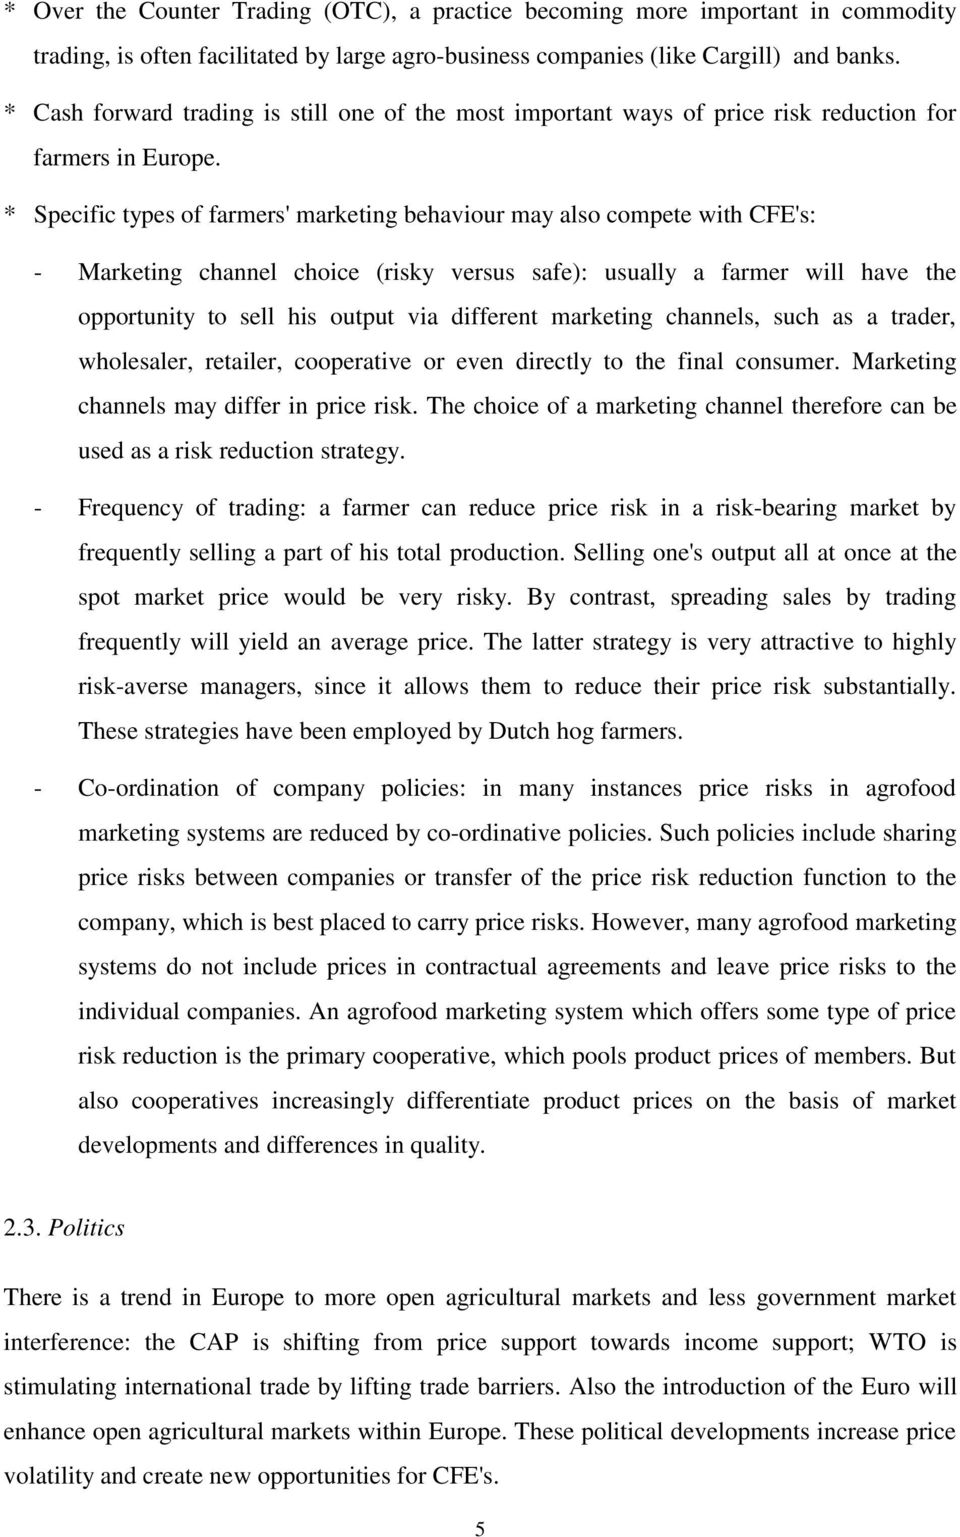 * Specific types of farmers' marketing behaviour may also compete with CFE's: - Marketing channel choice (risky versus safe): usually a farmer will have the opportunity to sell his output via